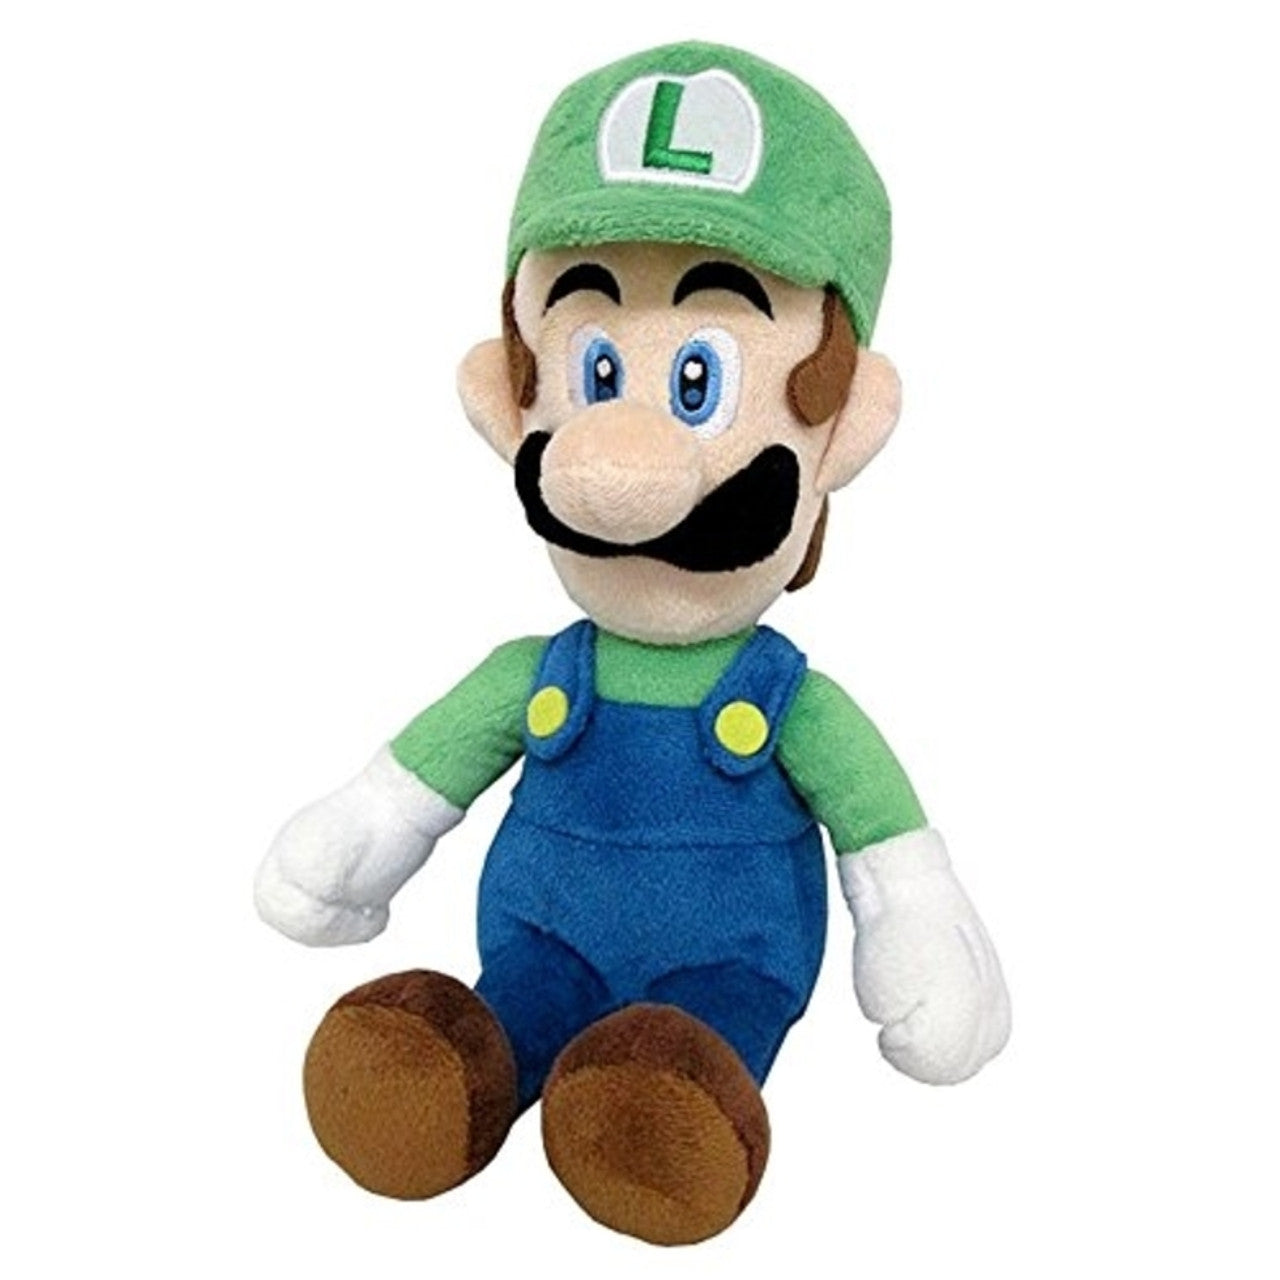 This is brand new.Officially Licensed Plush. Made from High Quality Materials.

Luigi is Mario's younger, taller, thinner twin brother. He is a major protagonist of the Mario series. Luigi has helped and fought alongside his brother on many occasions.